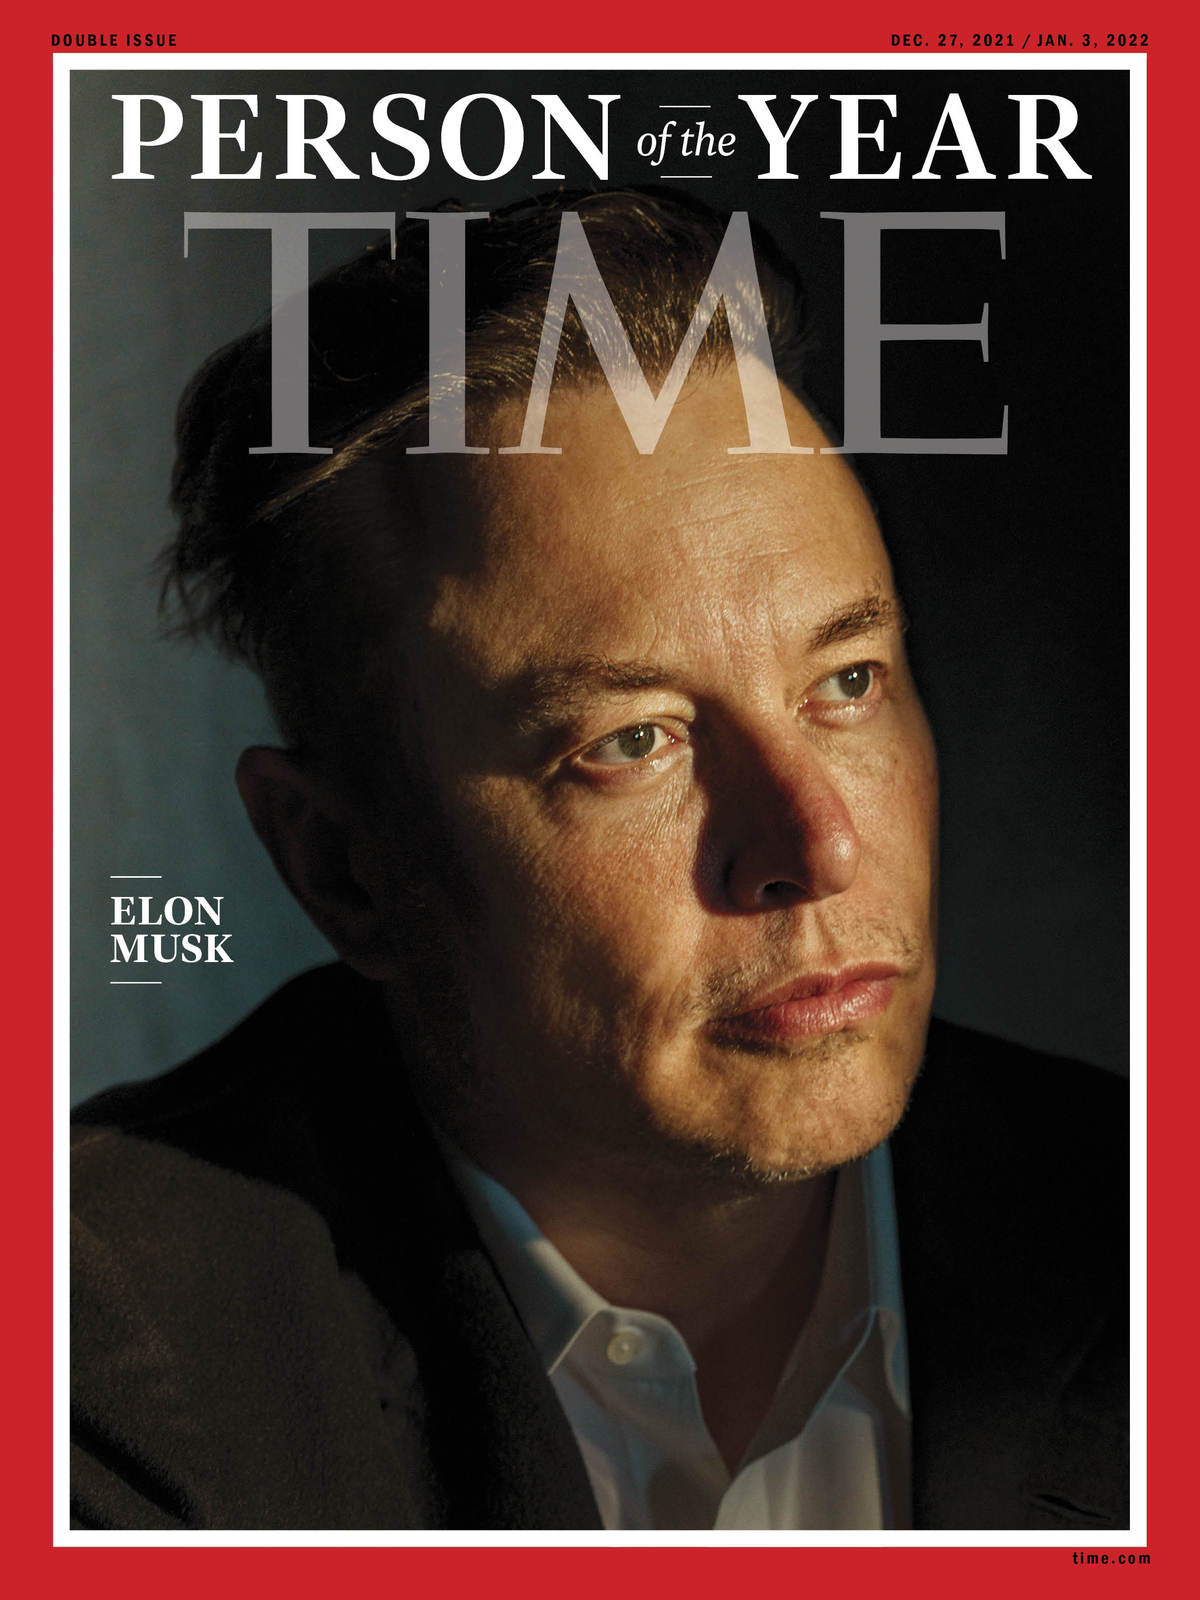 Elon Musk Person of the Year 2021 Poster Time Magazine Art Cover Print 24x36